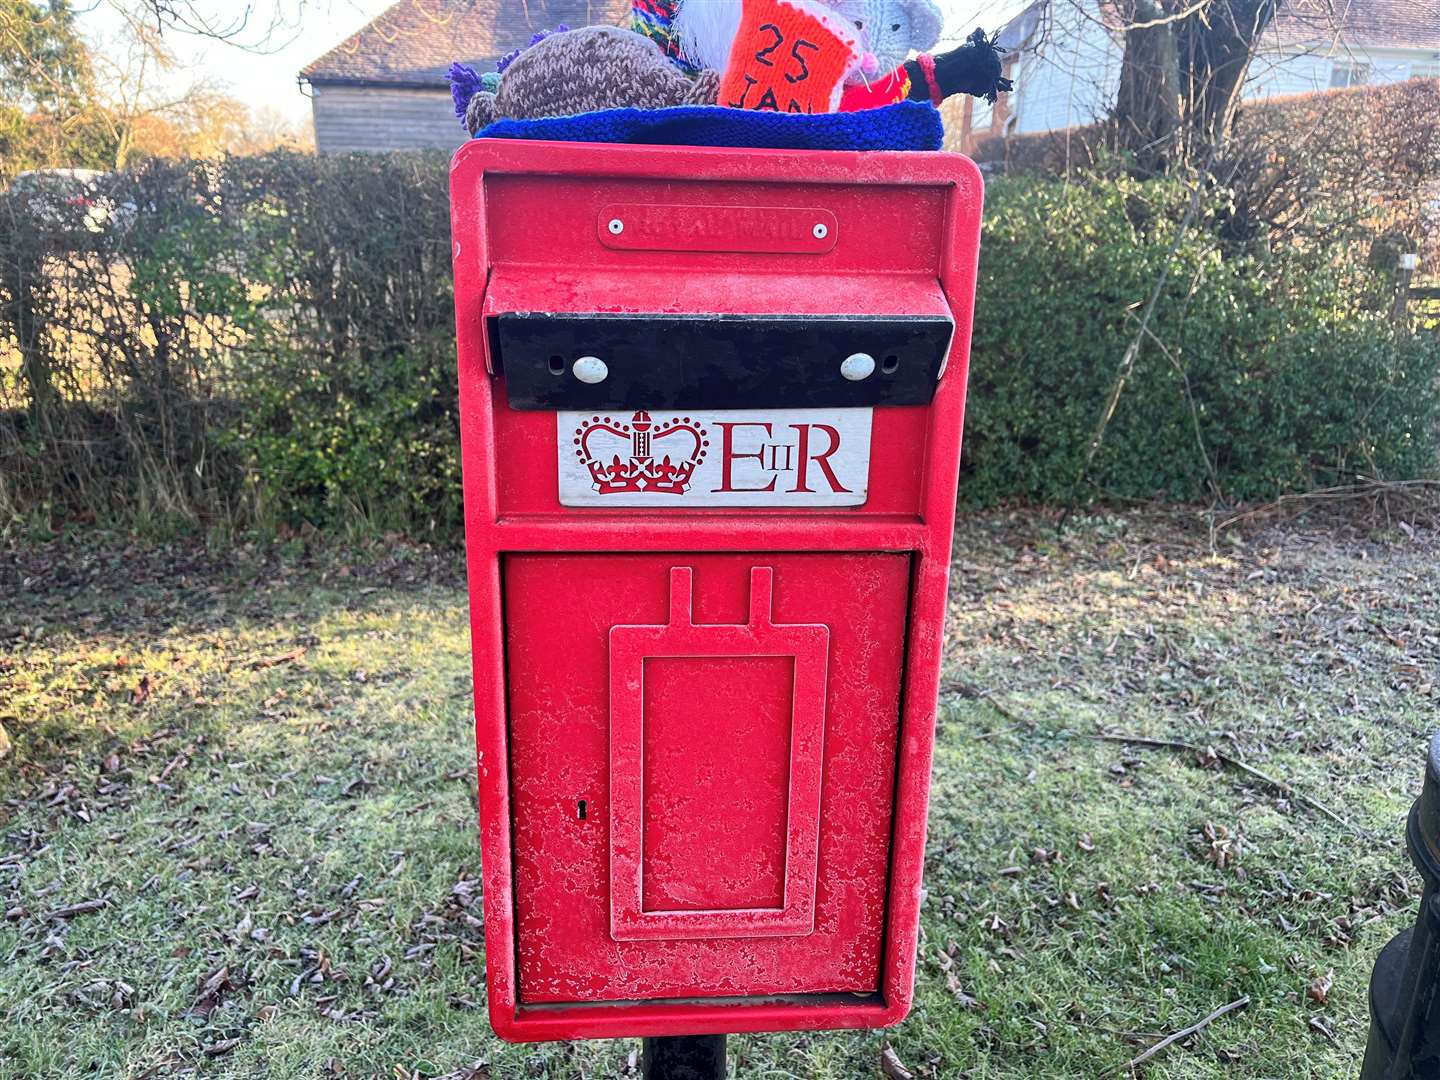 The locked postbox was installed in October – but remains out of action